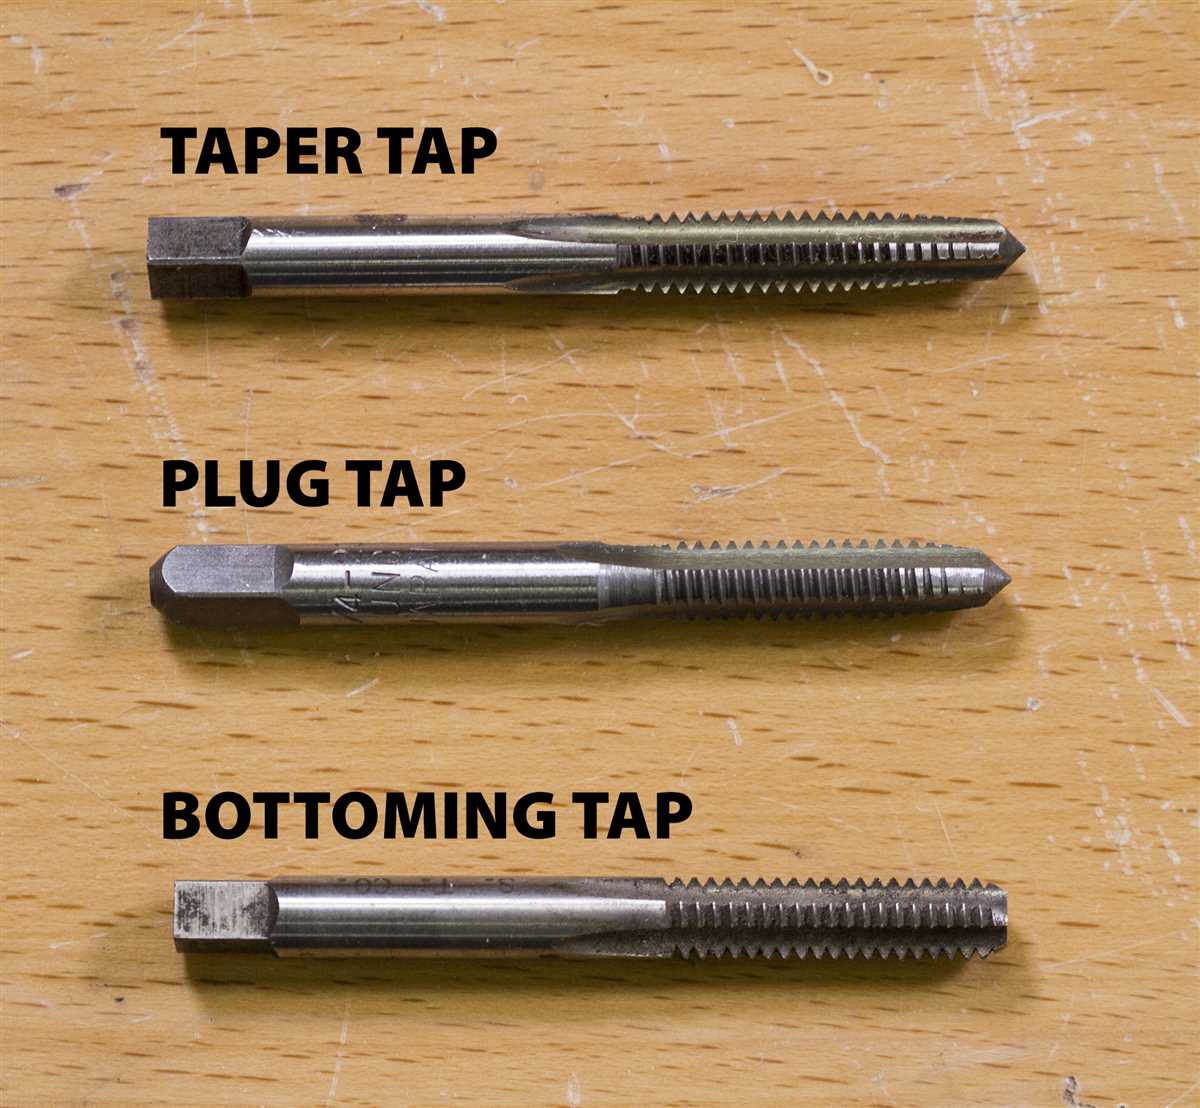 What is drilling and tapping?